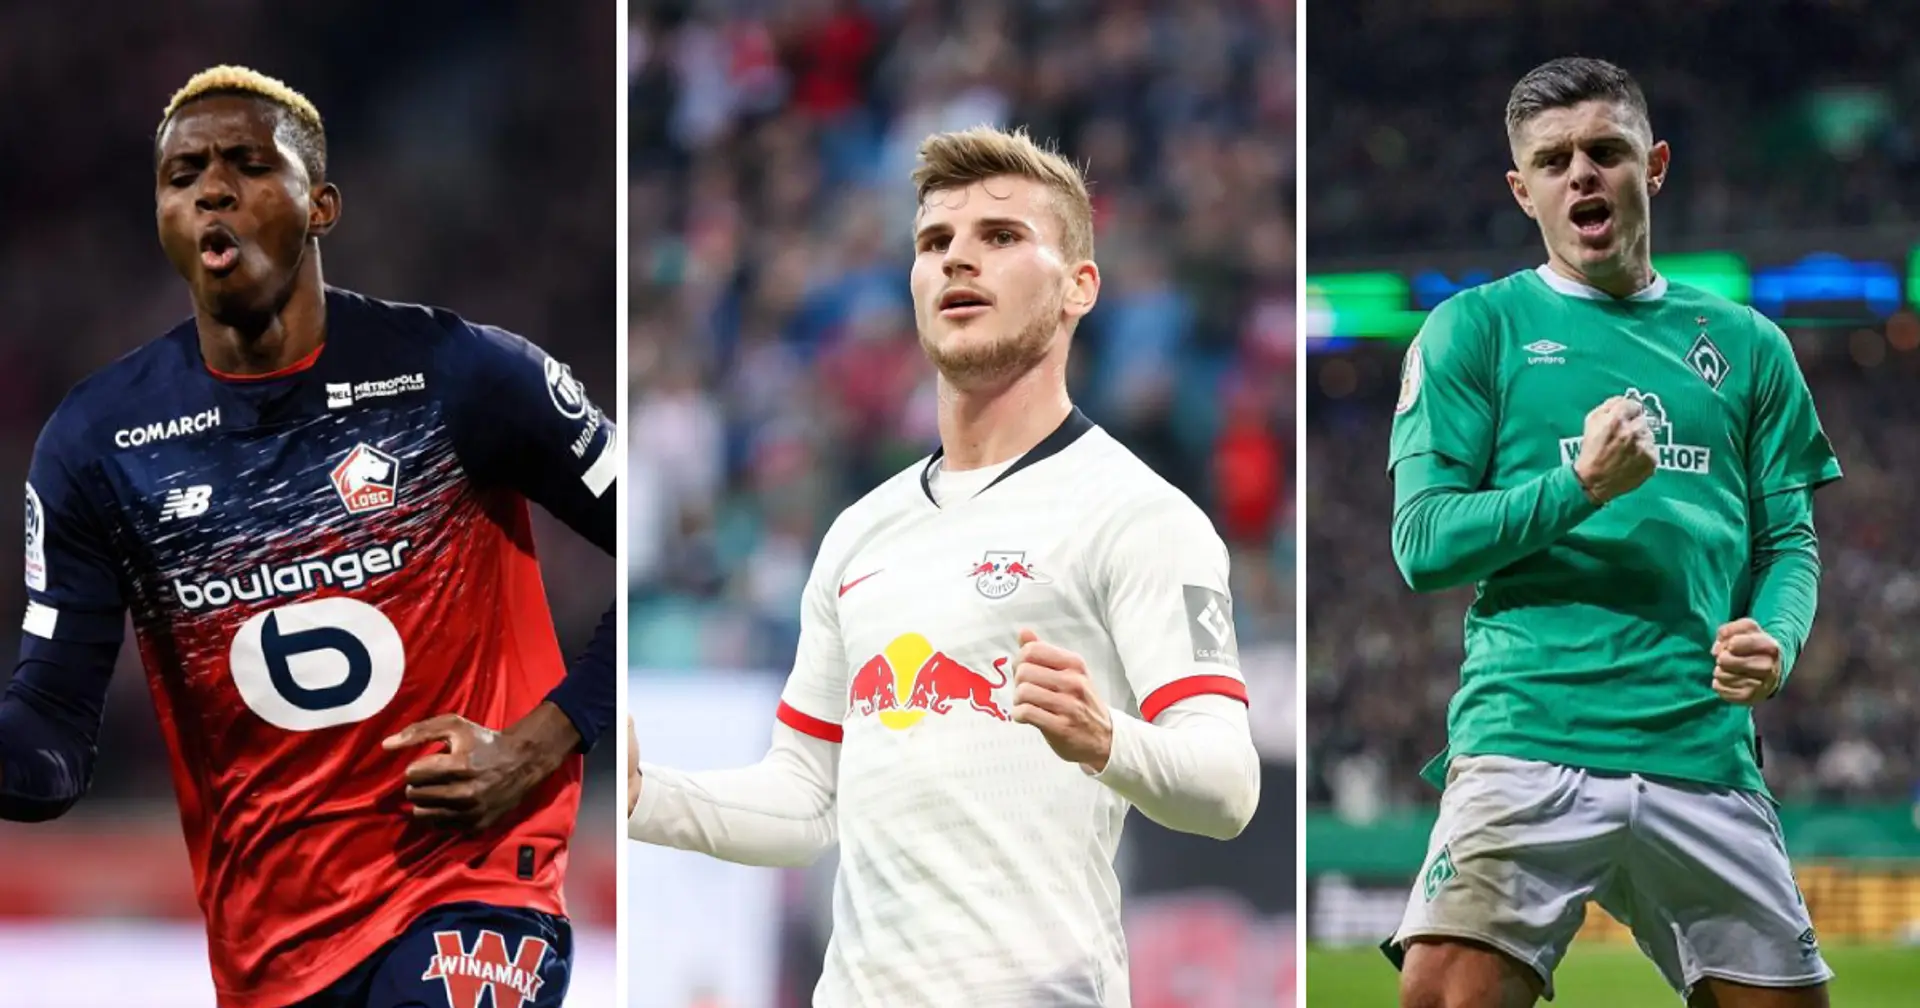 Timo Werner has two reported alternatives: All you need to know in 90 seconds